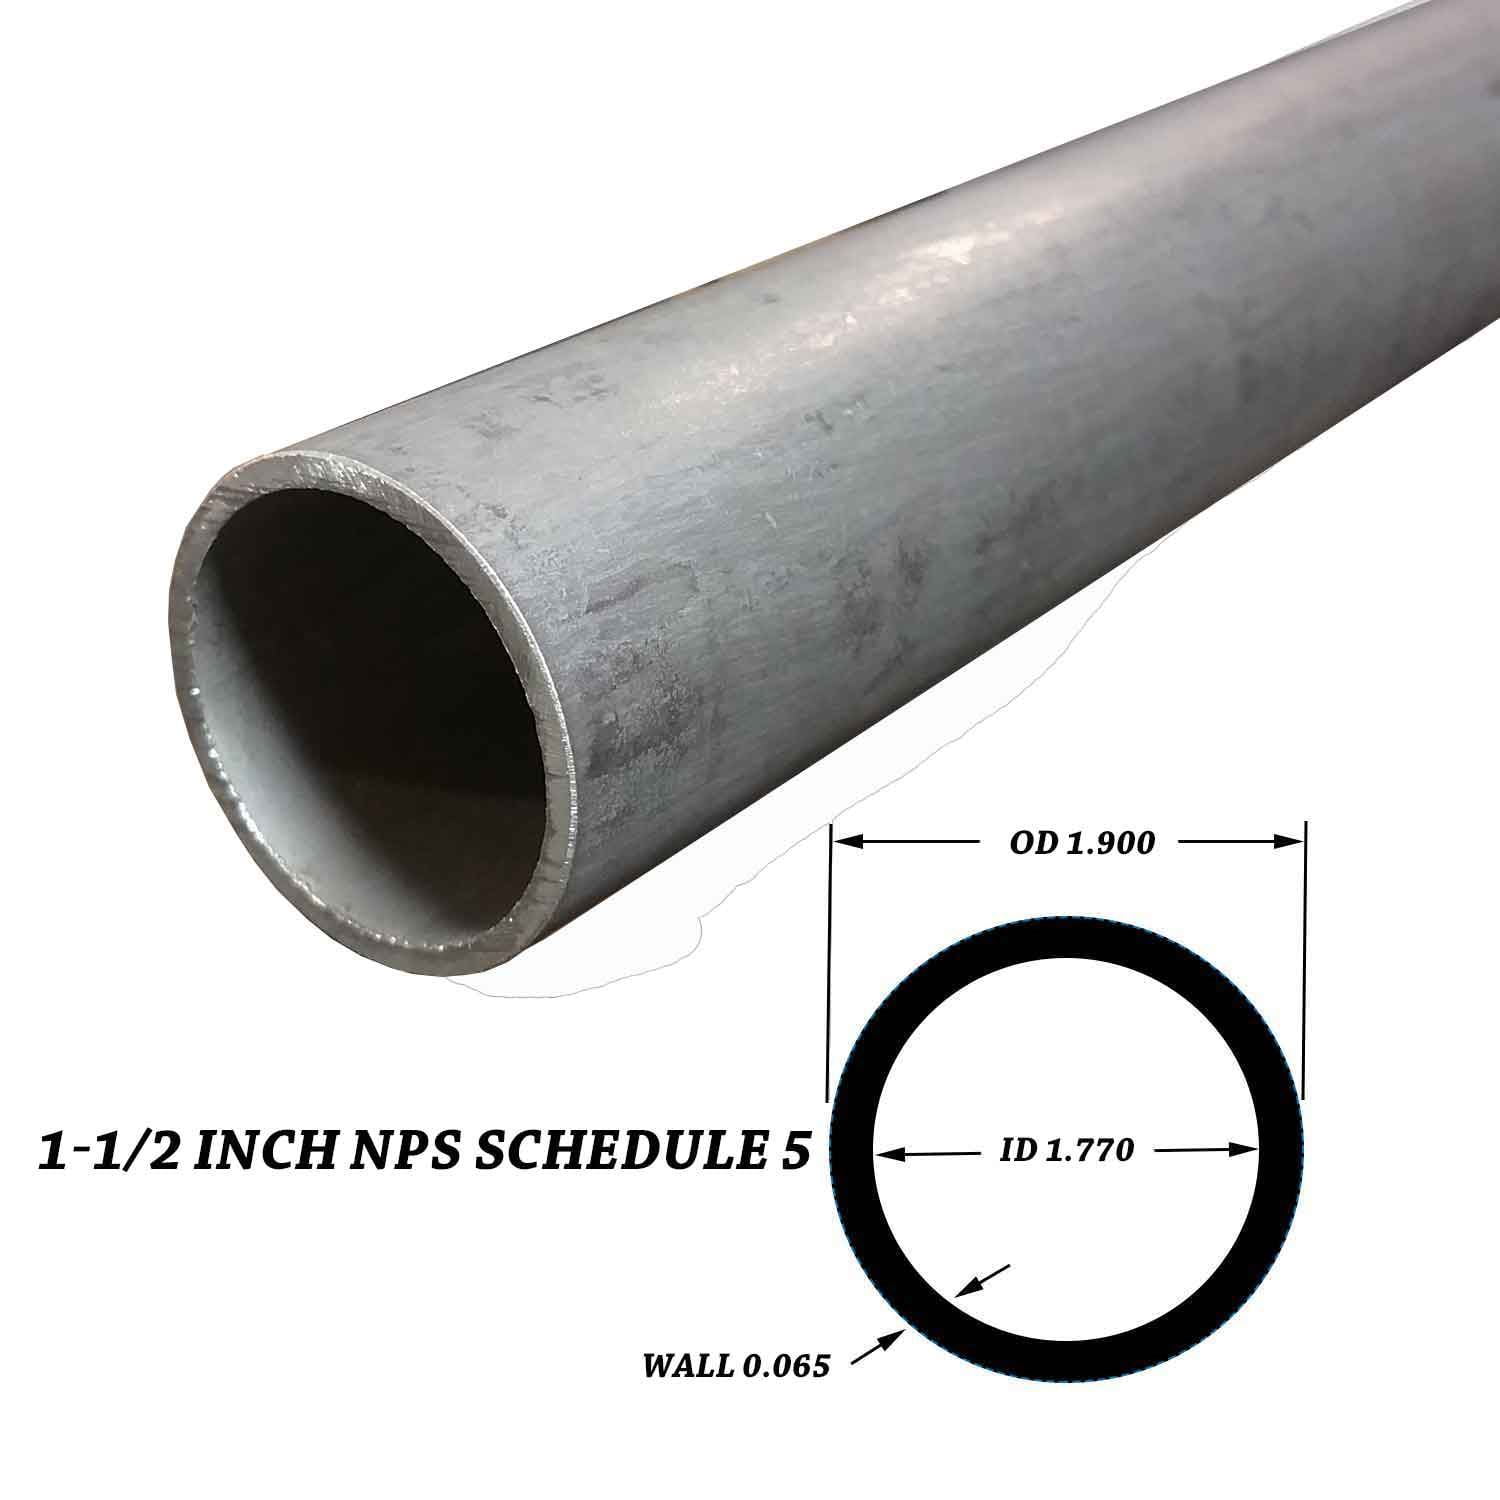 KLM 1-1/2" Schedule 40 304 Stainless Steel Pipe 